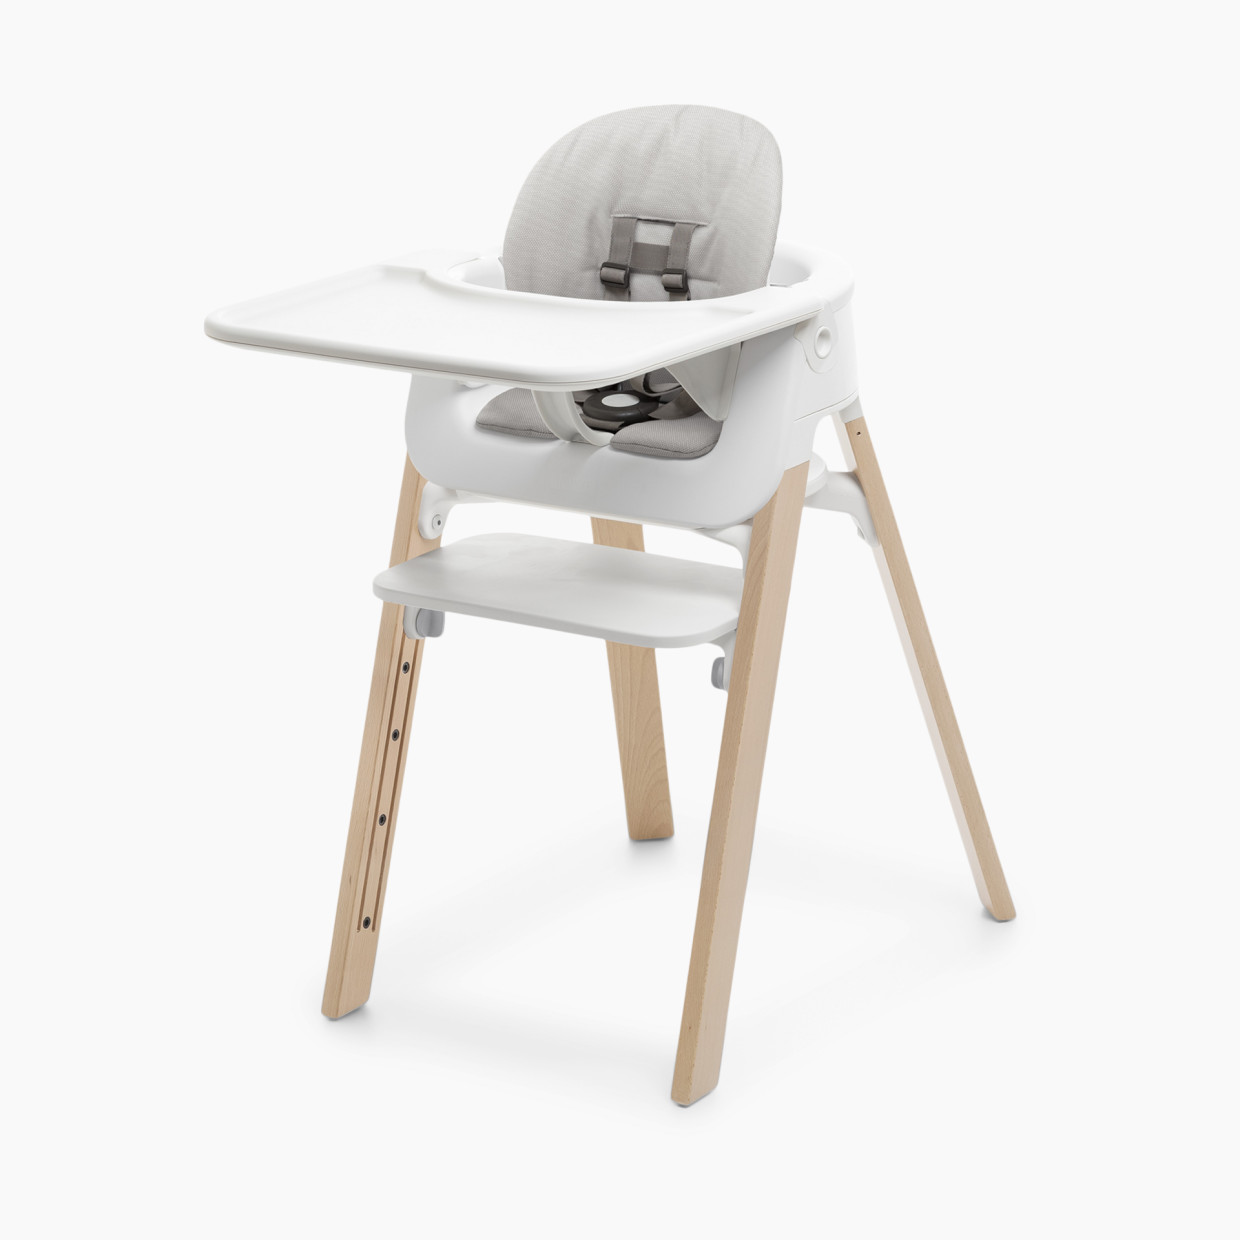 Stokke Steps Complete High Chair - White Seat/Natural Legs | Babylist Shop